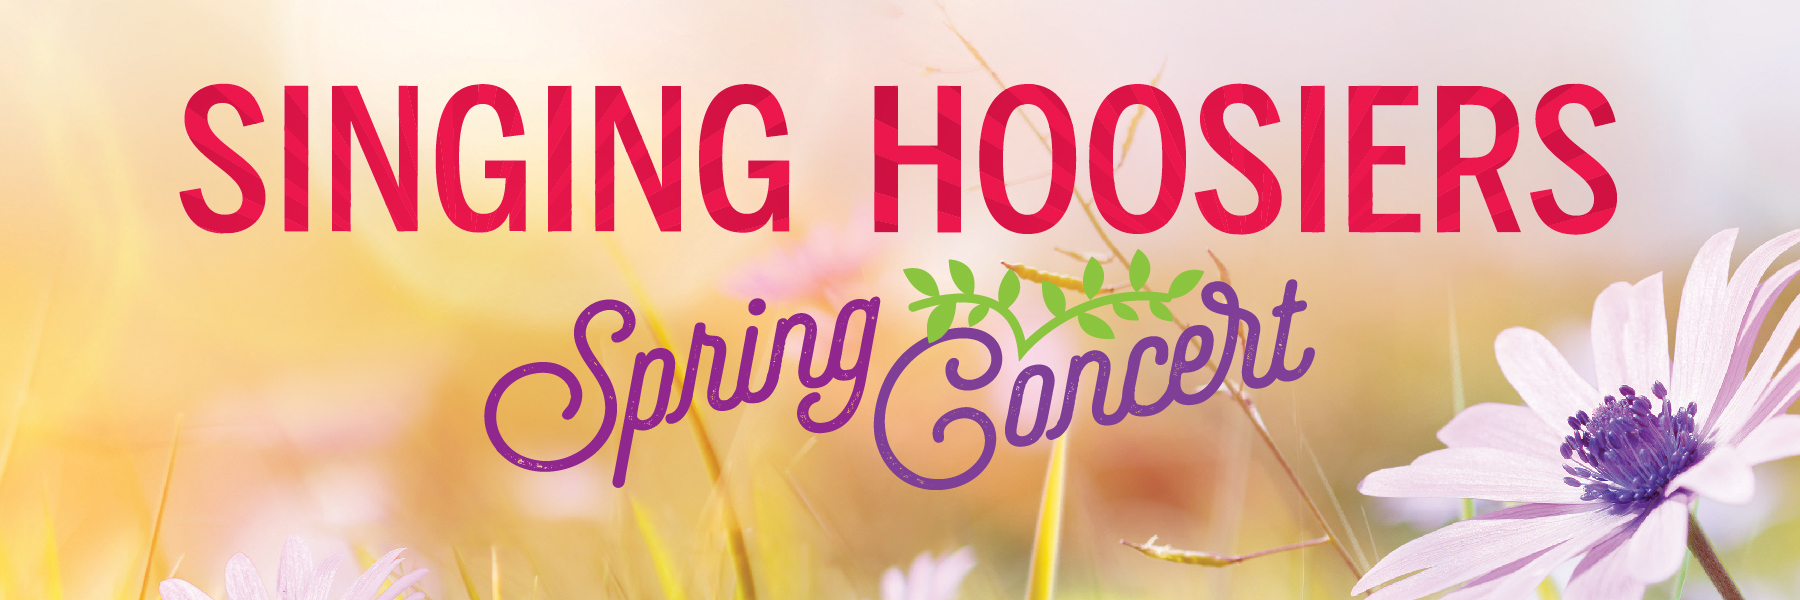 Title Art for Singing Hoosiers Spring Concert. Image shows title in front of colorful background with flowers and grass in the foreground.